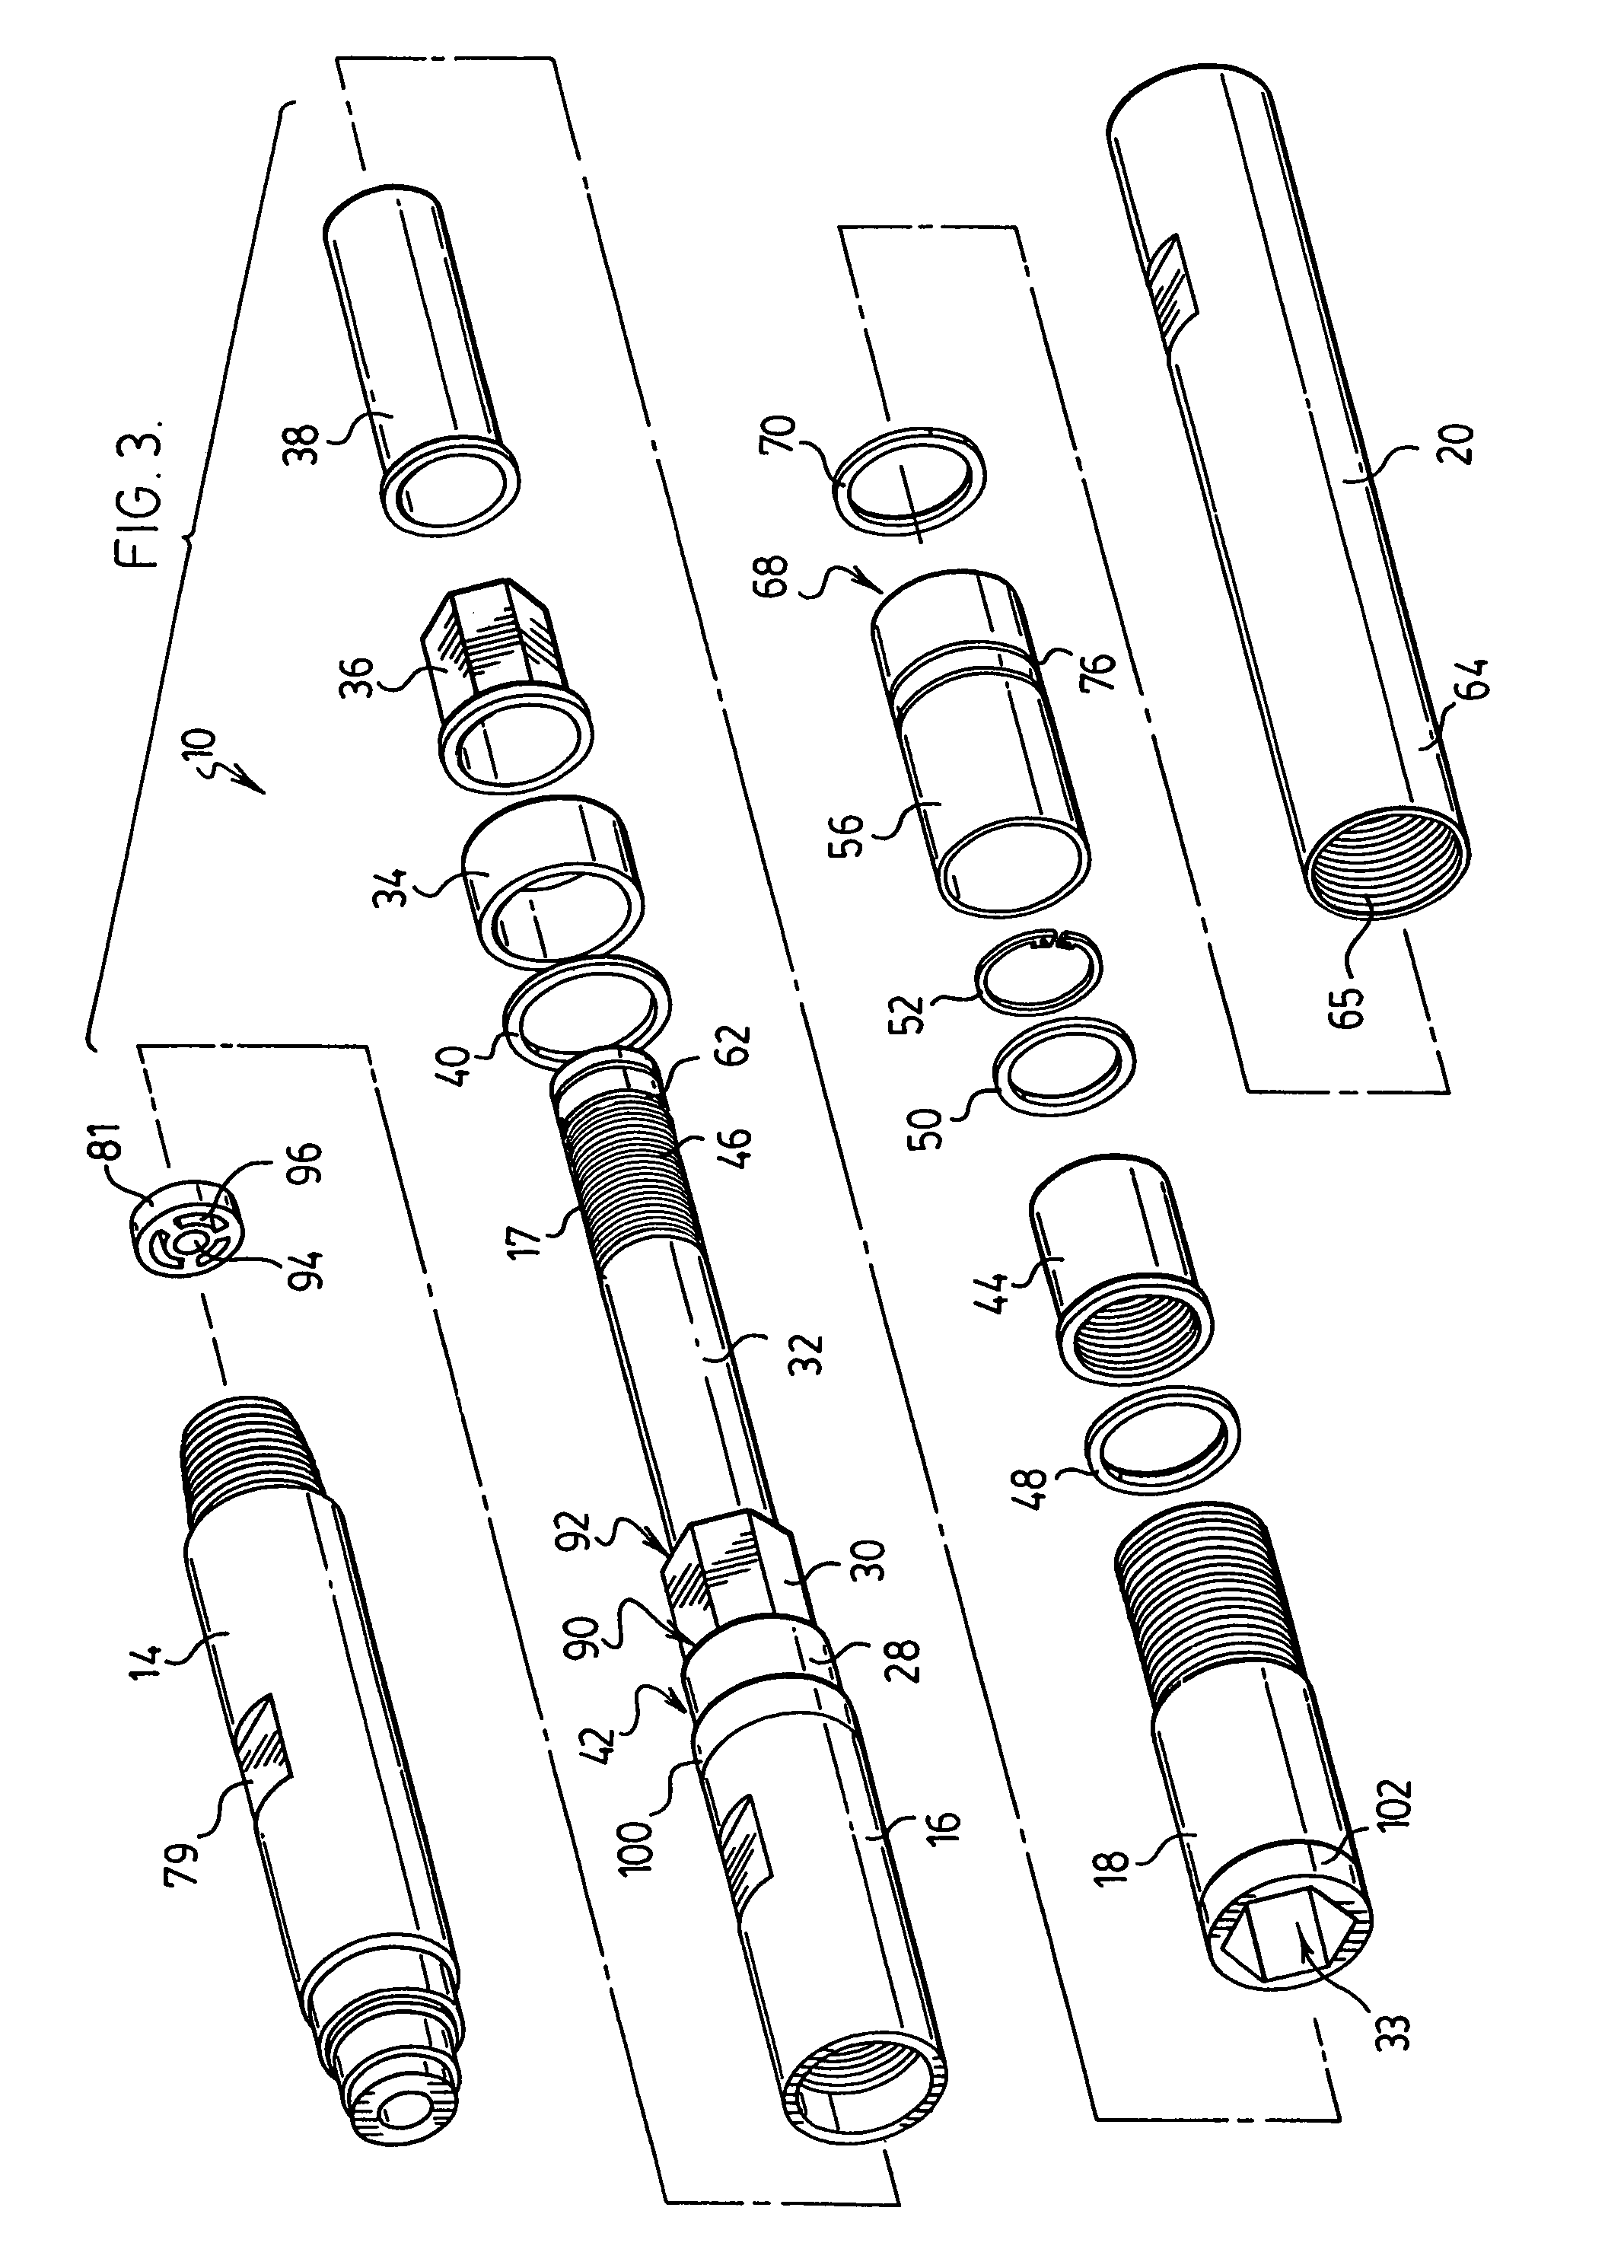 Electrical isolation connector subassembly for use in directional drilling